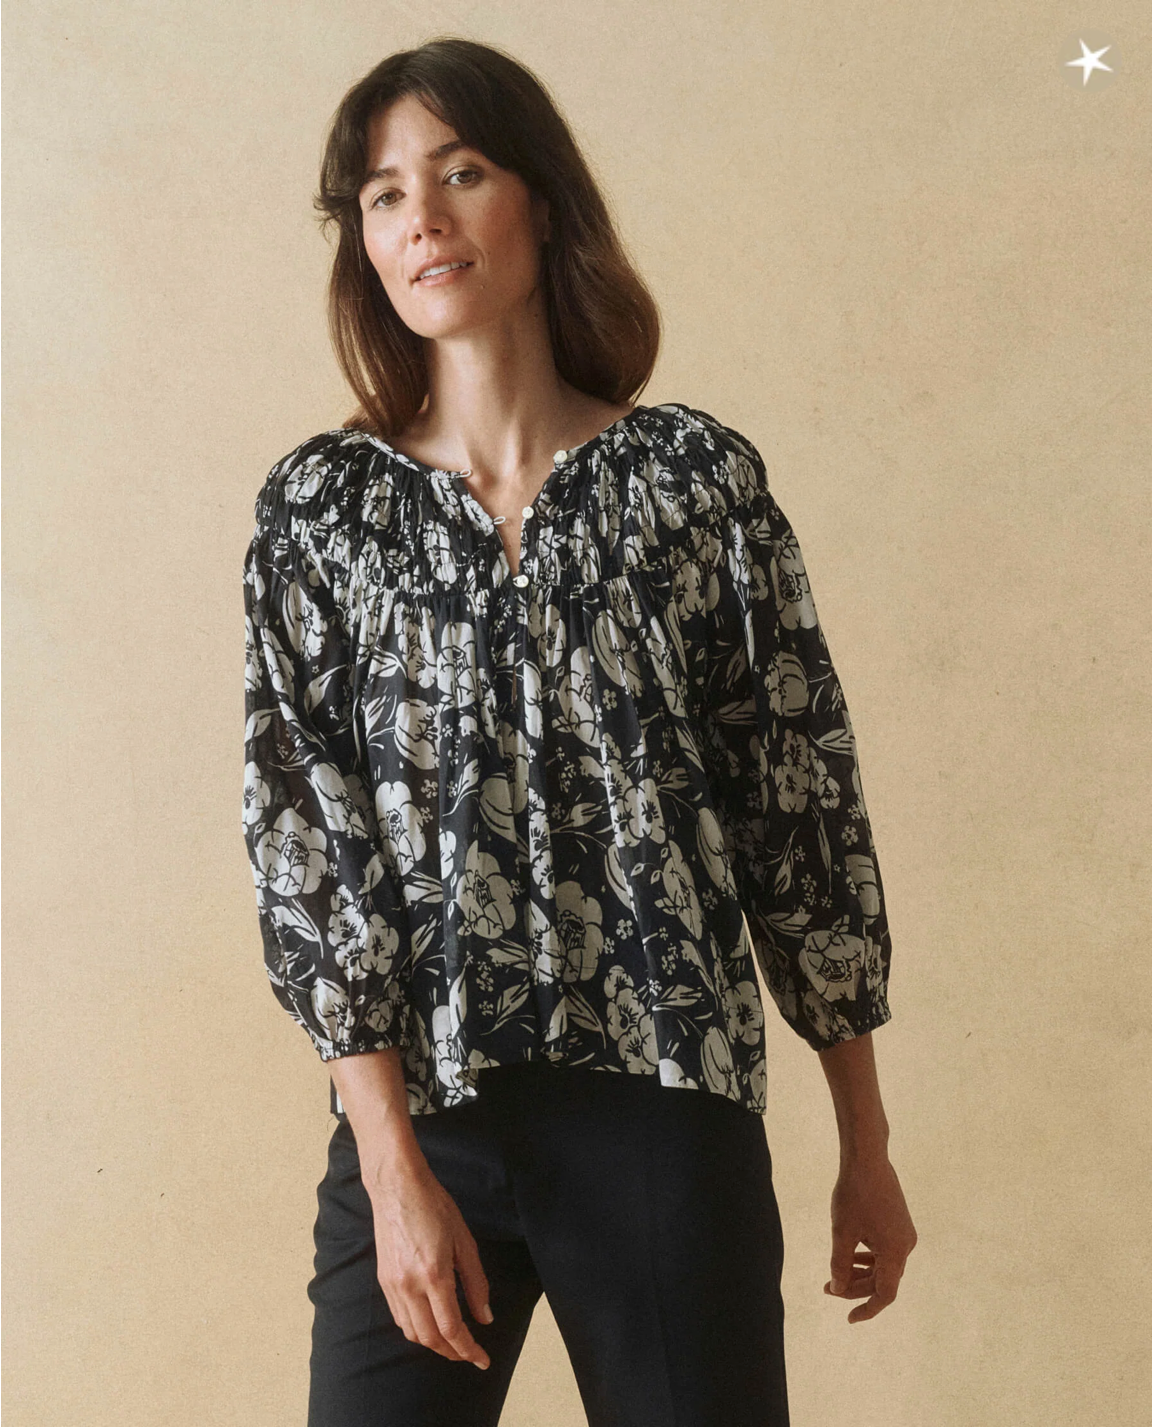 The Swift Top. Navy Whisper Floral